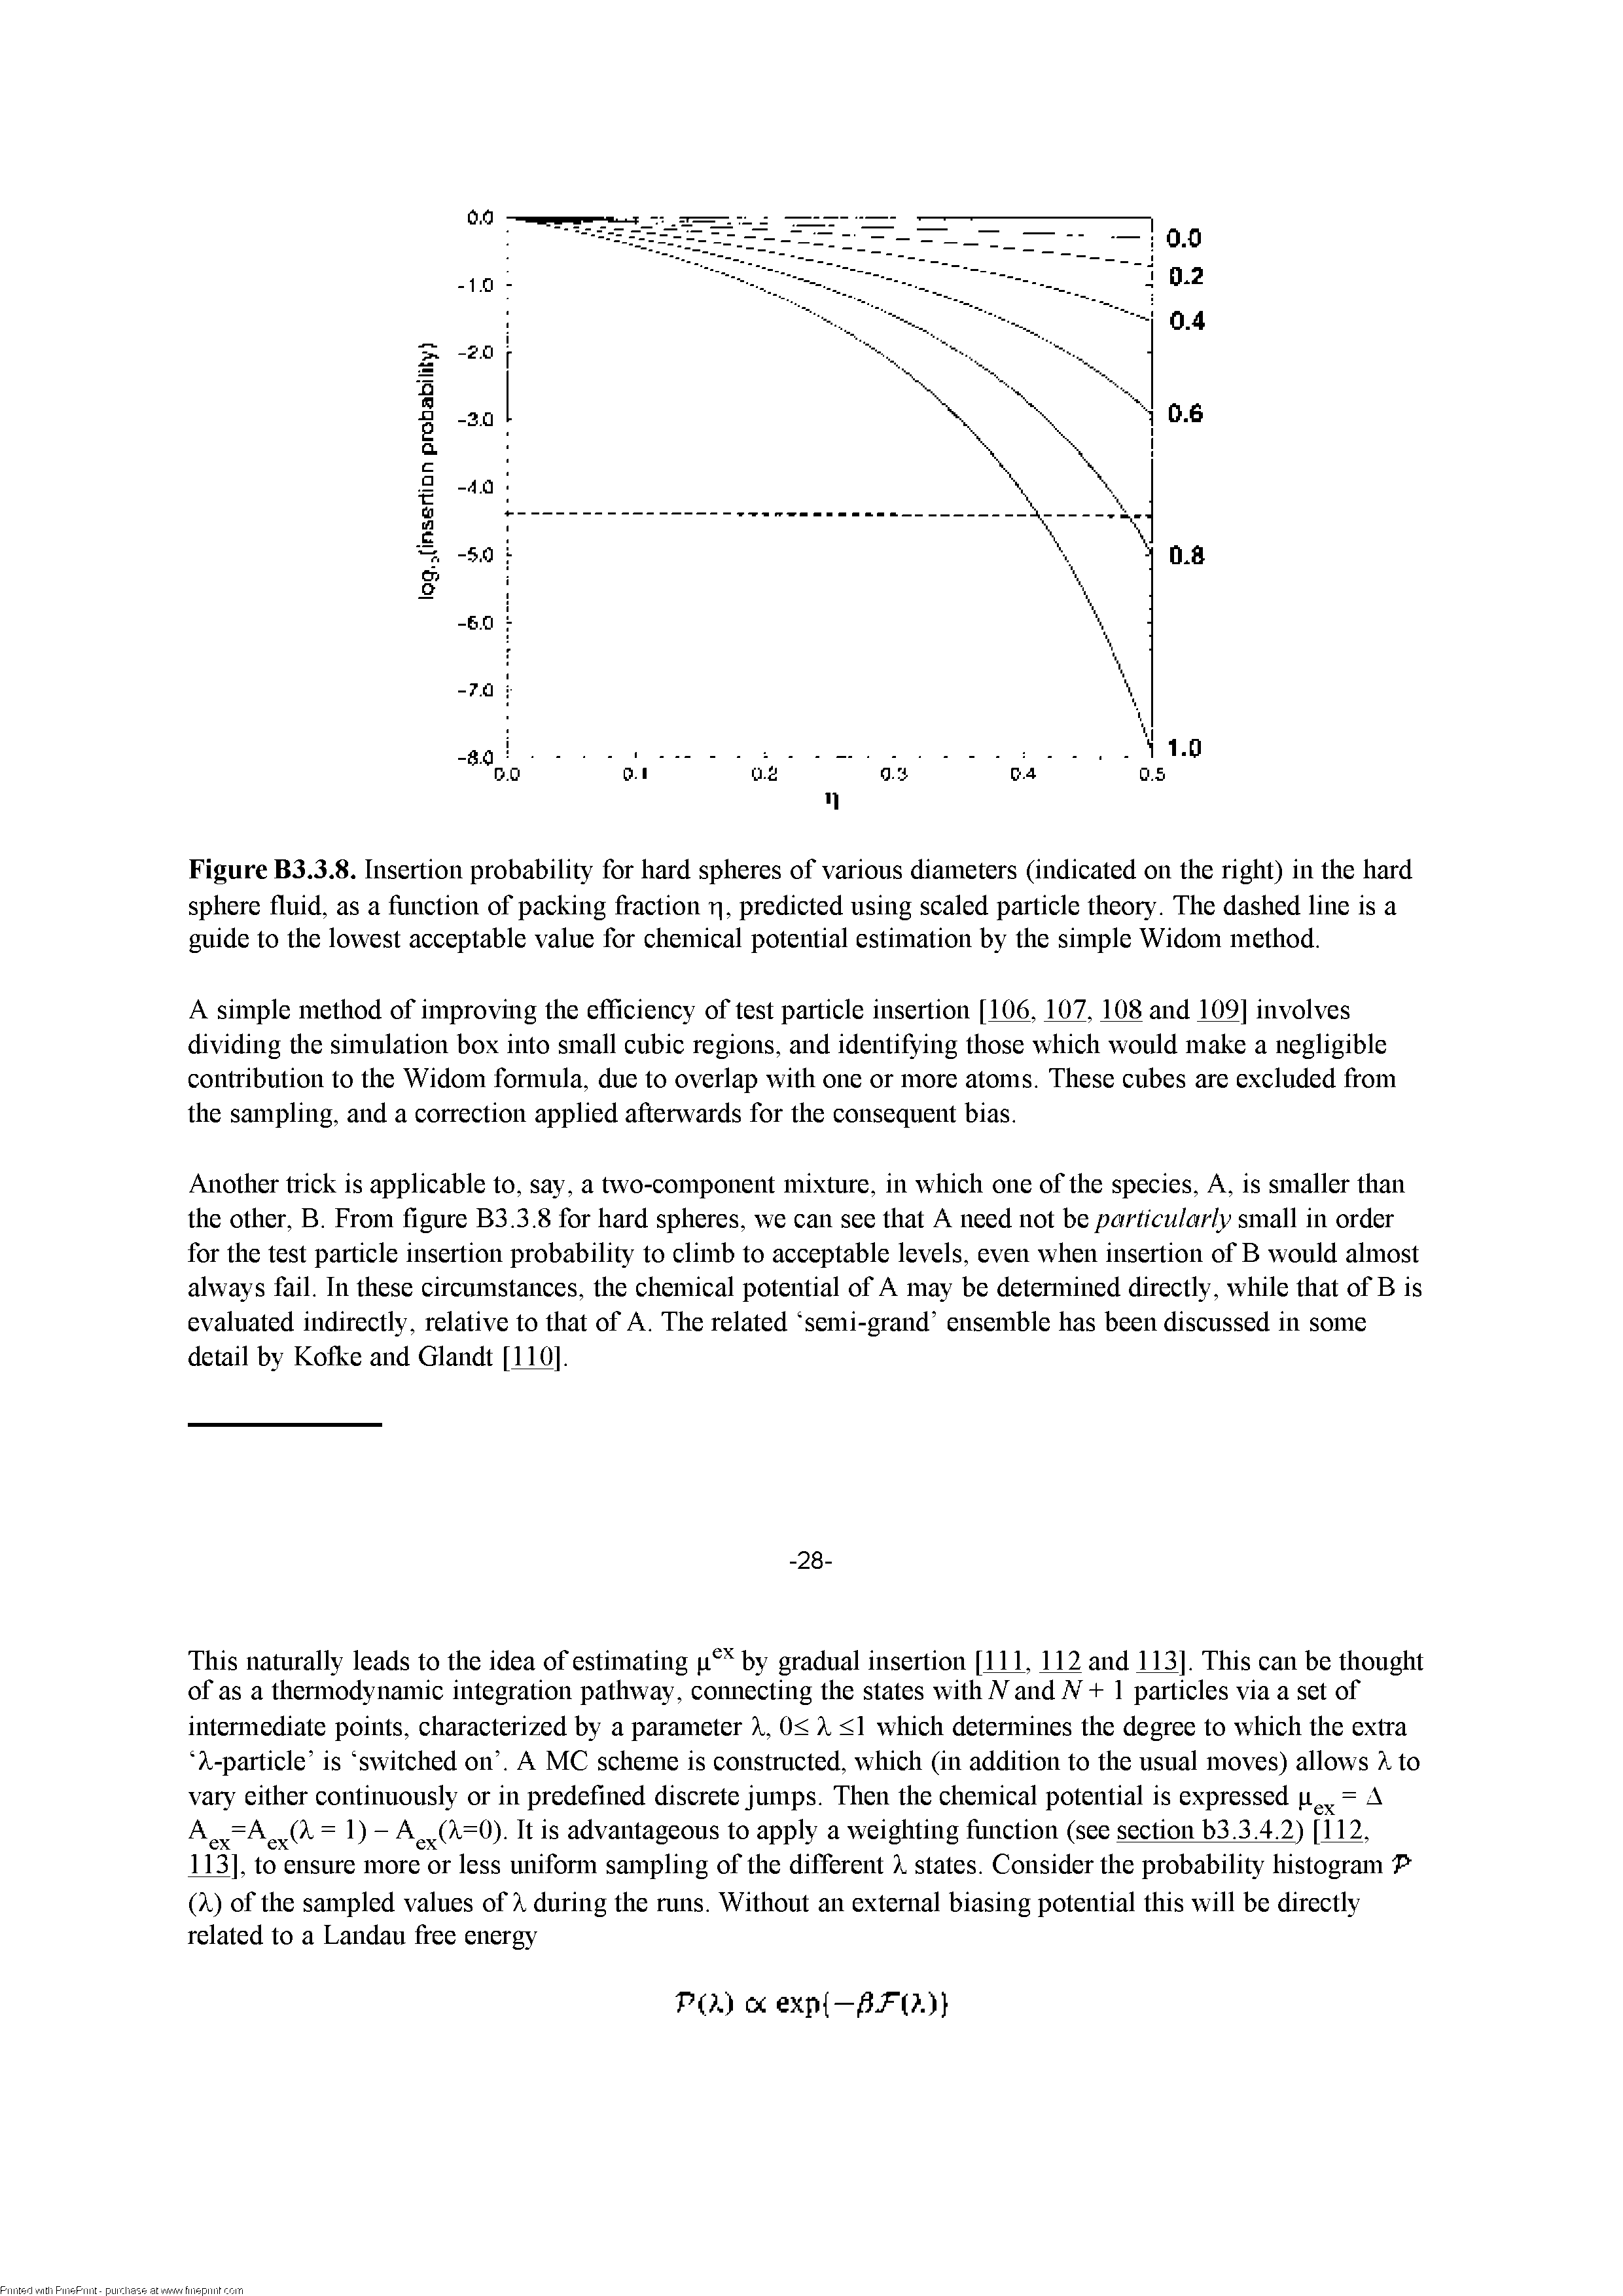 Figure B3.3.8. Insertion probability for hard spheres of various diameters (indieated on the right) in the hard sphere fluid, as a fiinetion of paeking fraetion p, predieted using sealed partiele theory. The dashed line is a guide to the lowest aeeeptable value for ehemieal potential estimation by the simple Widom method.